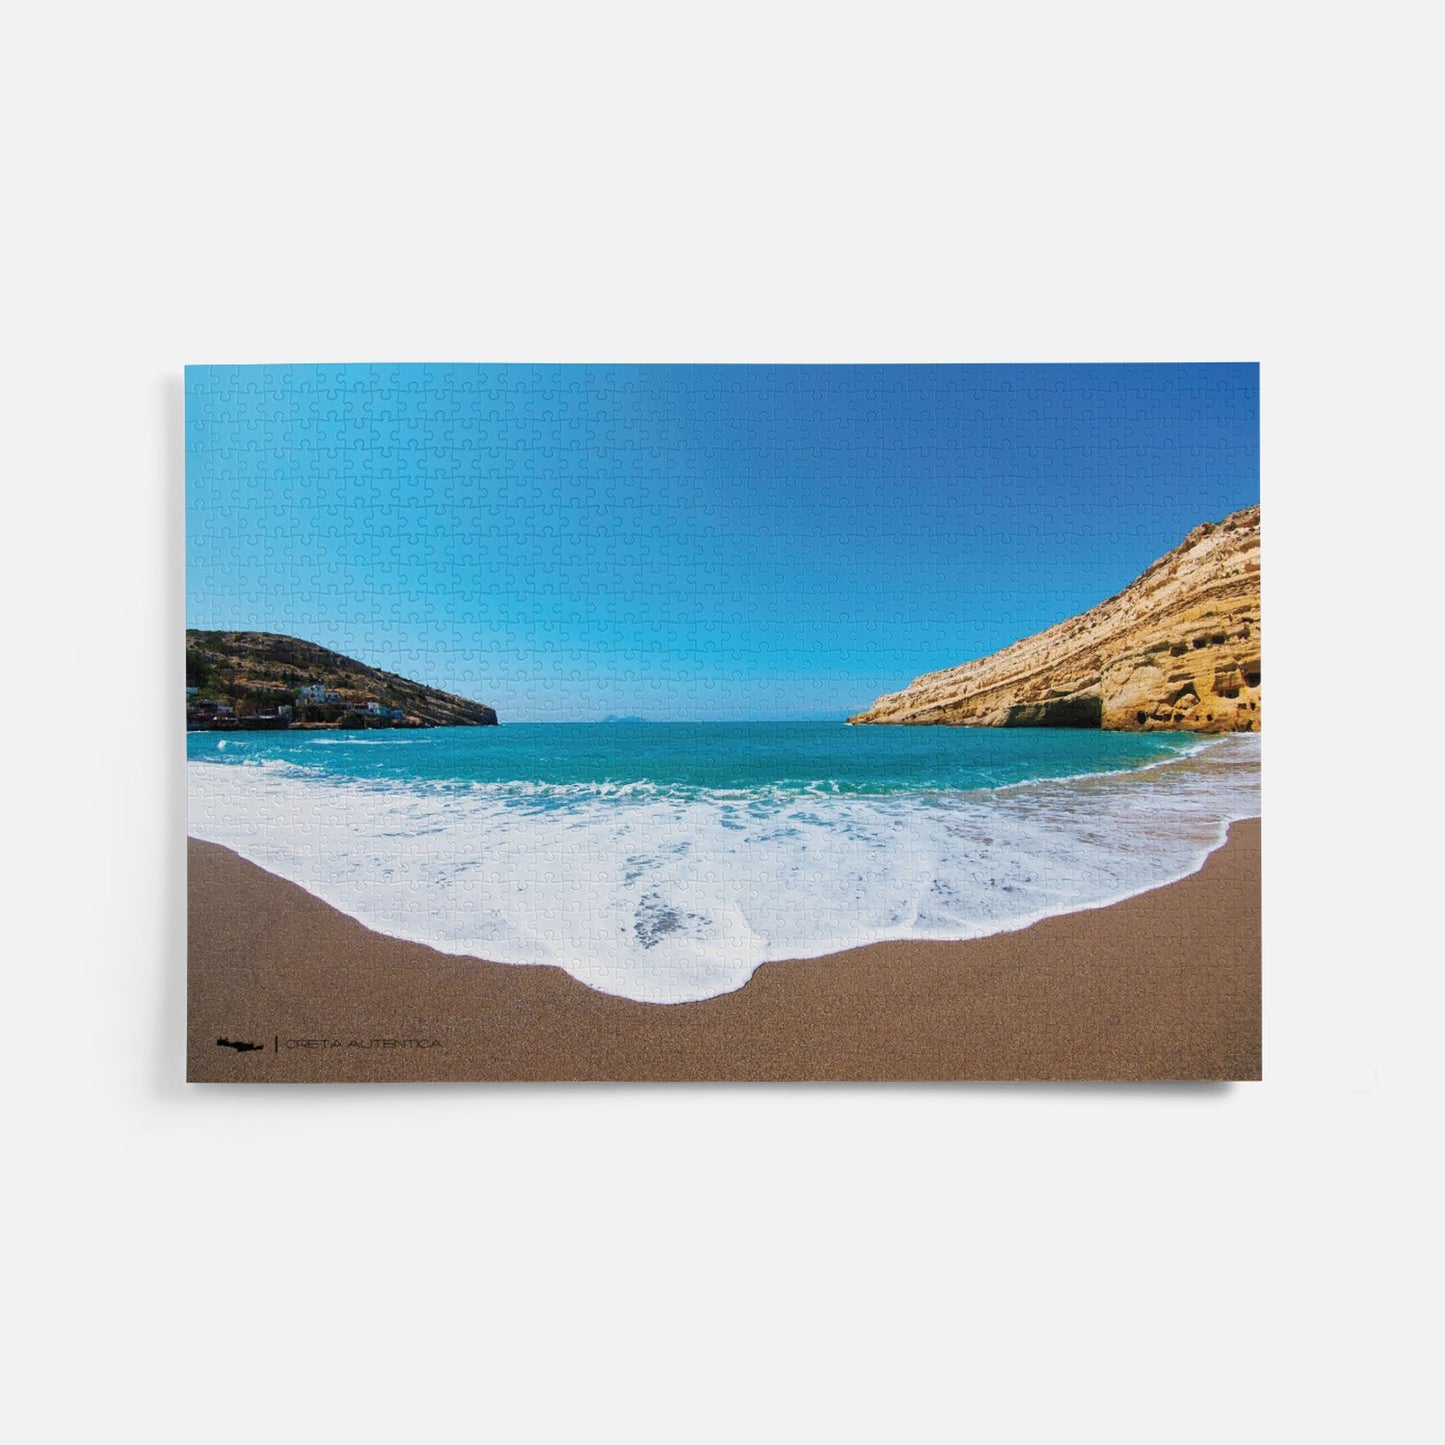 Limited Edition 1000 Piece Matala Beach Puzzle